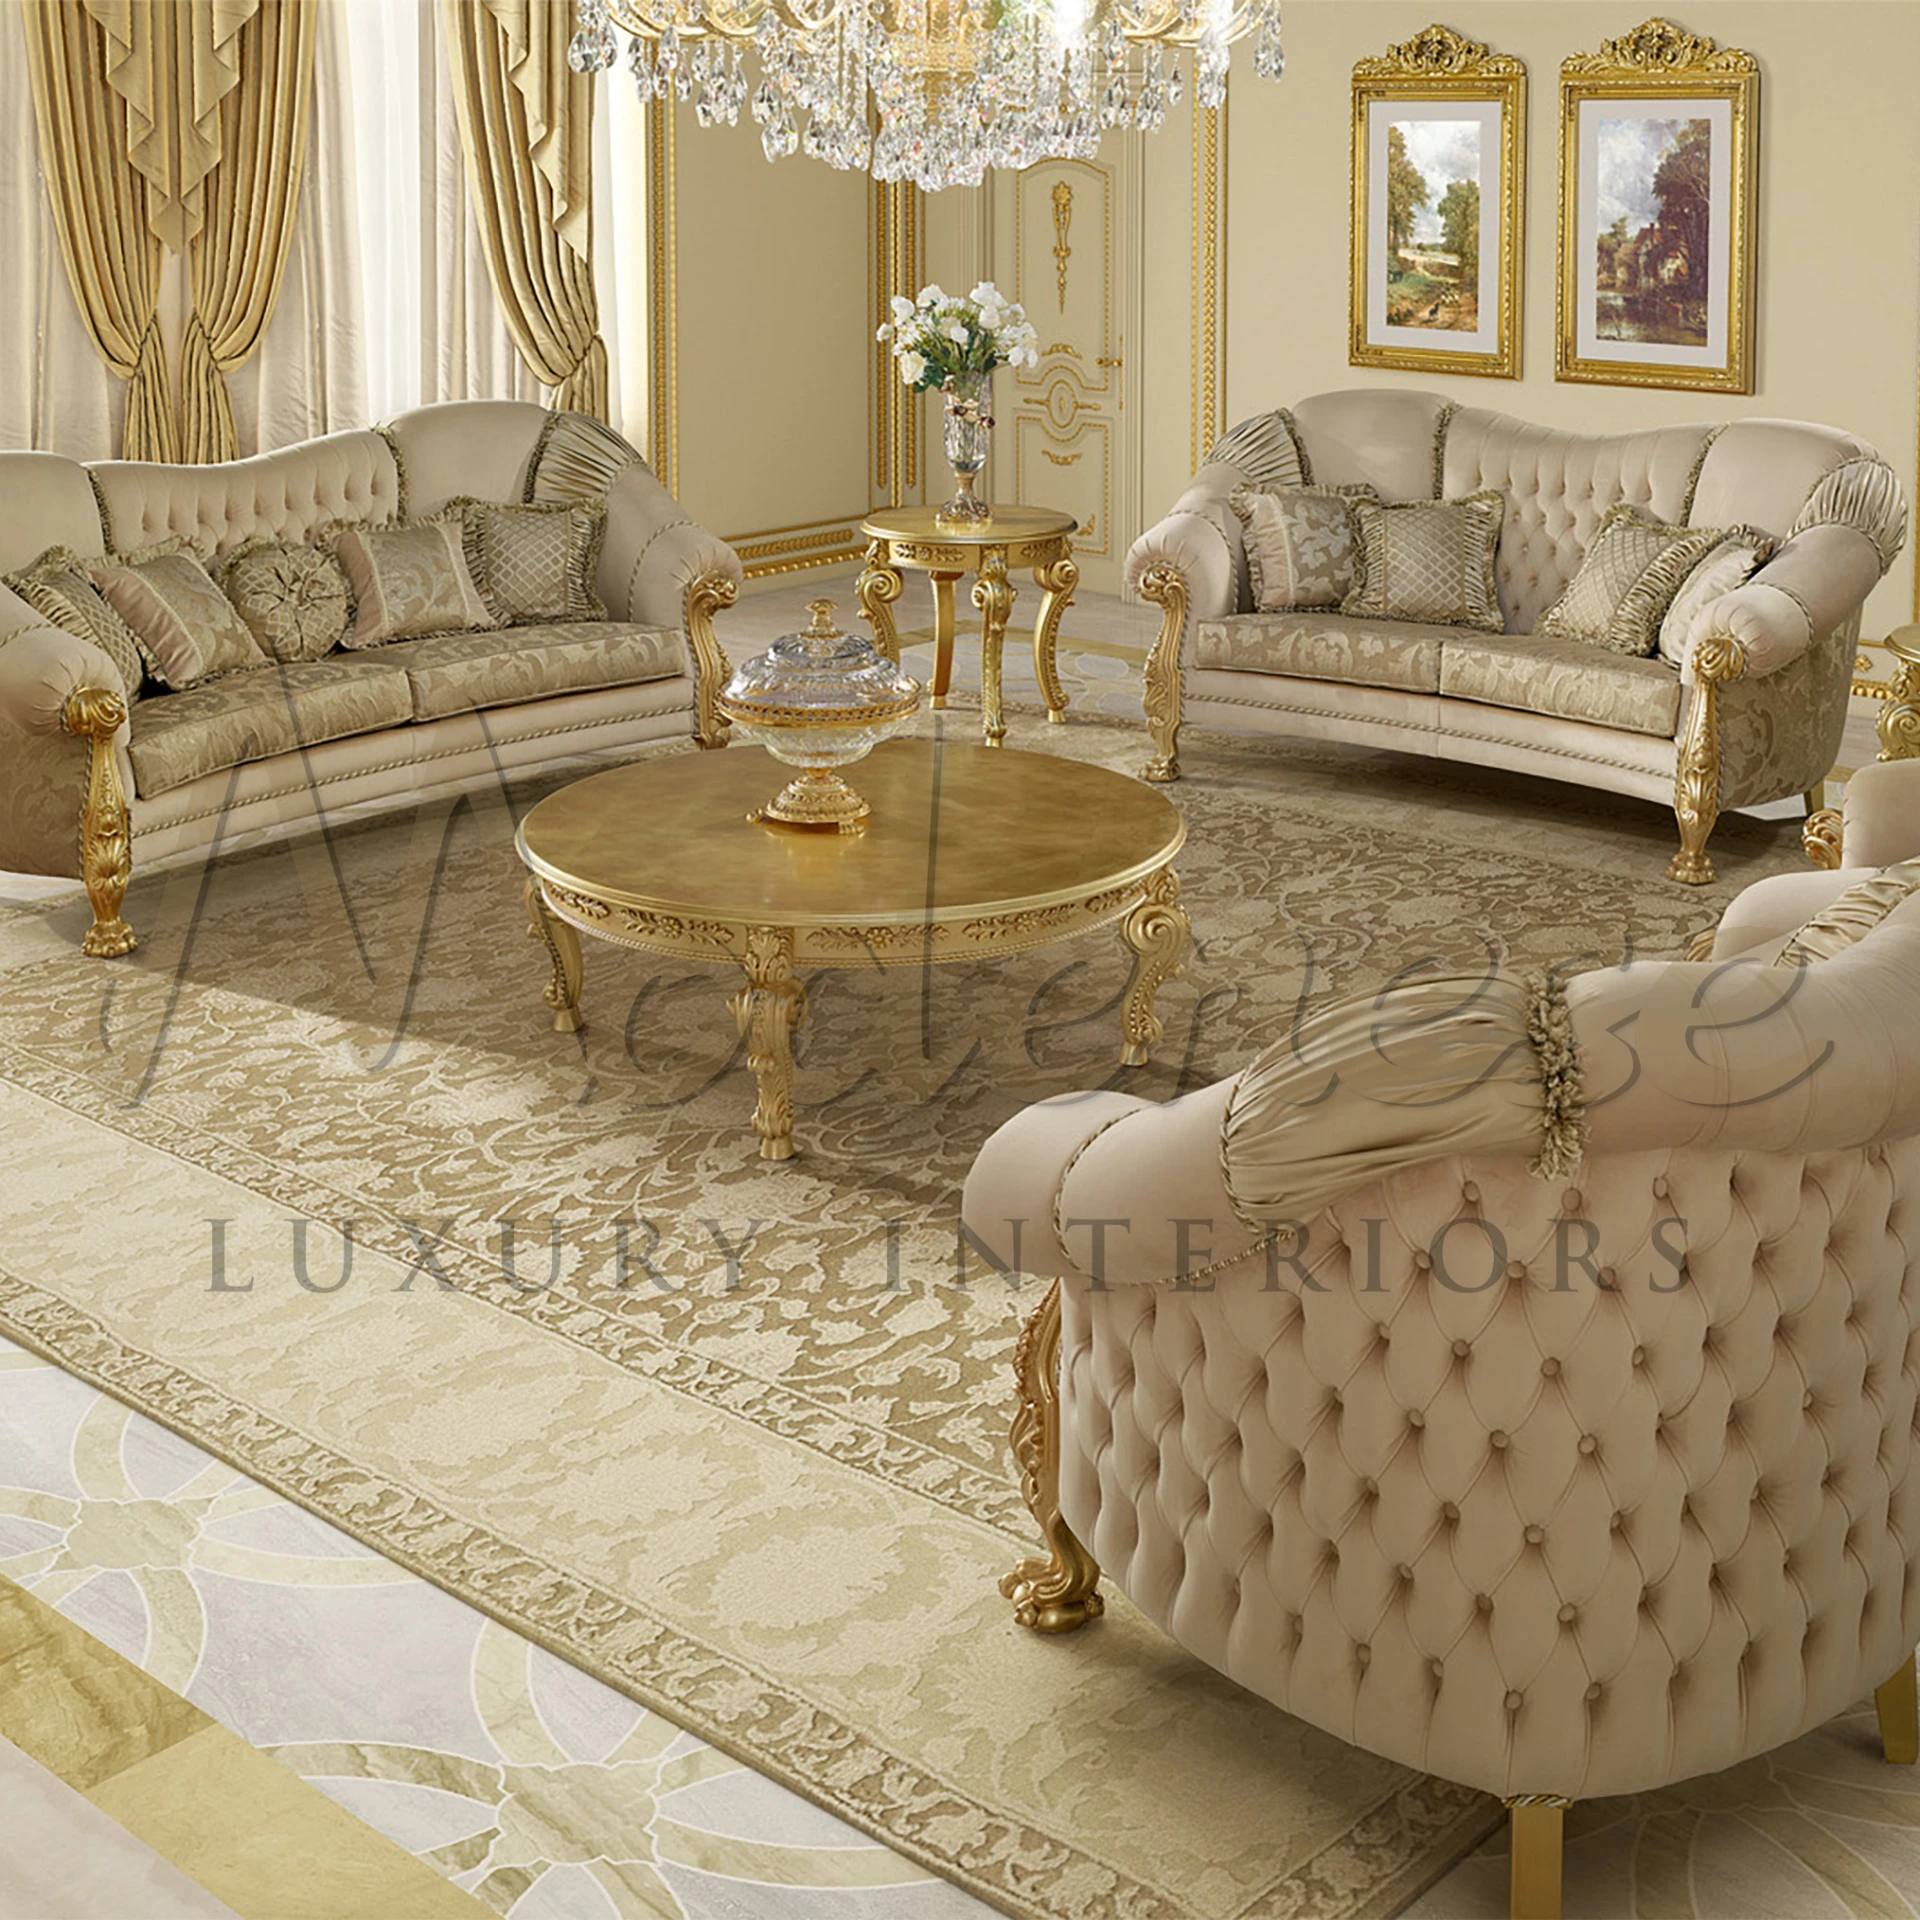 Elegance Personified: Gilded Baroque Coffee Table for Refined Living Spaces.